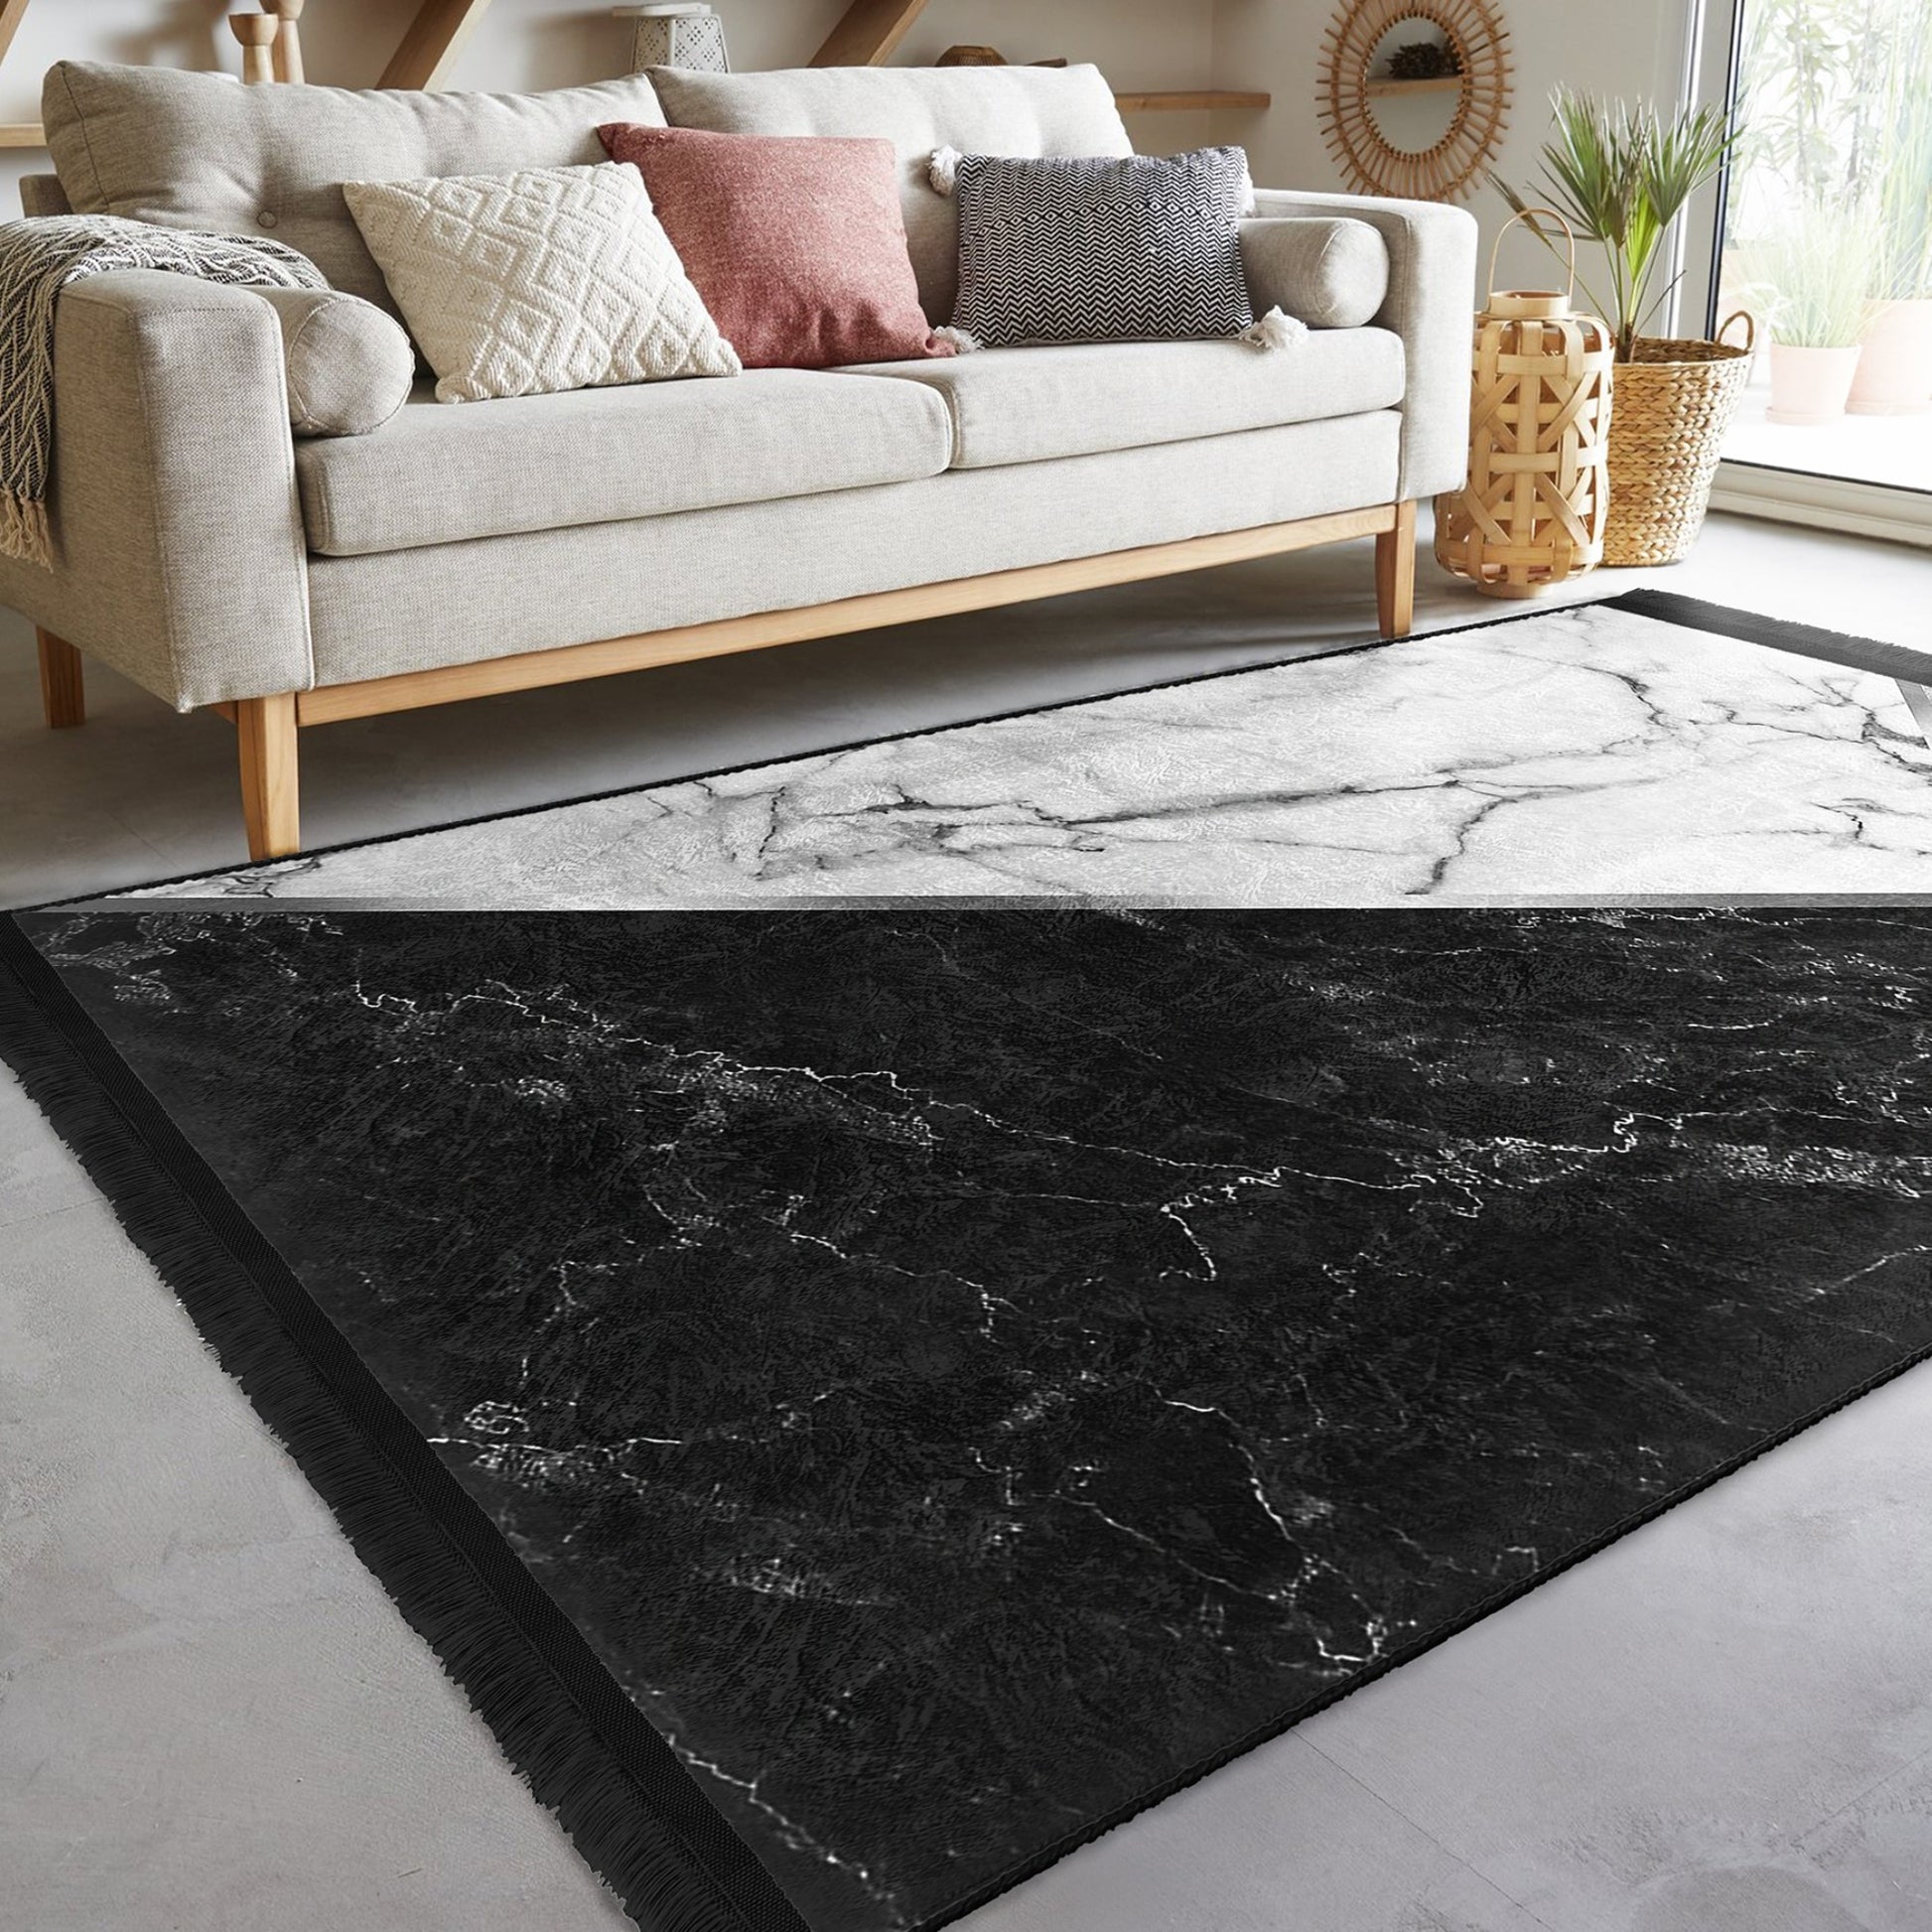 Elegant Rug with Contemporary Marble Design for Home Decor